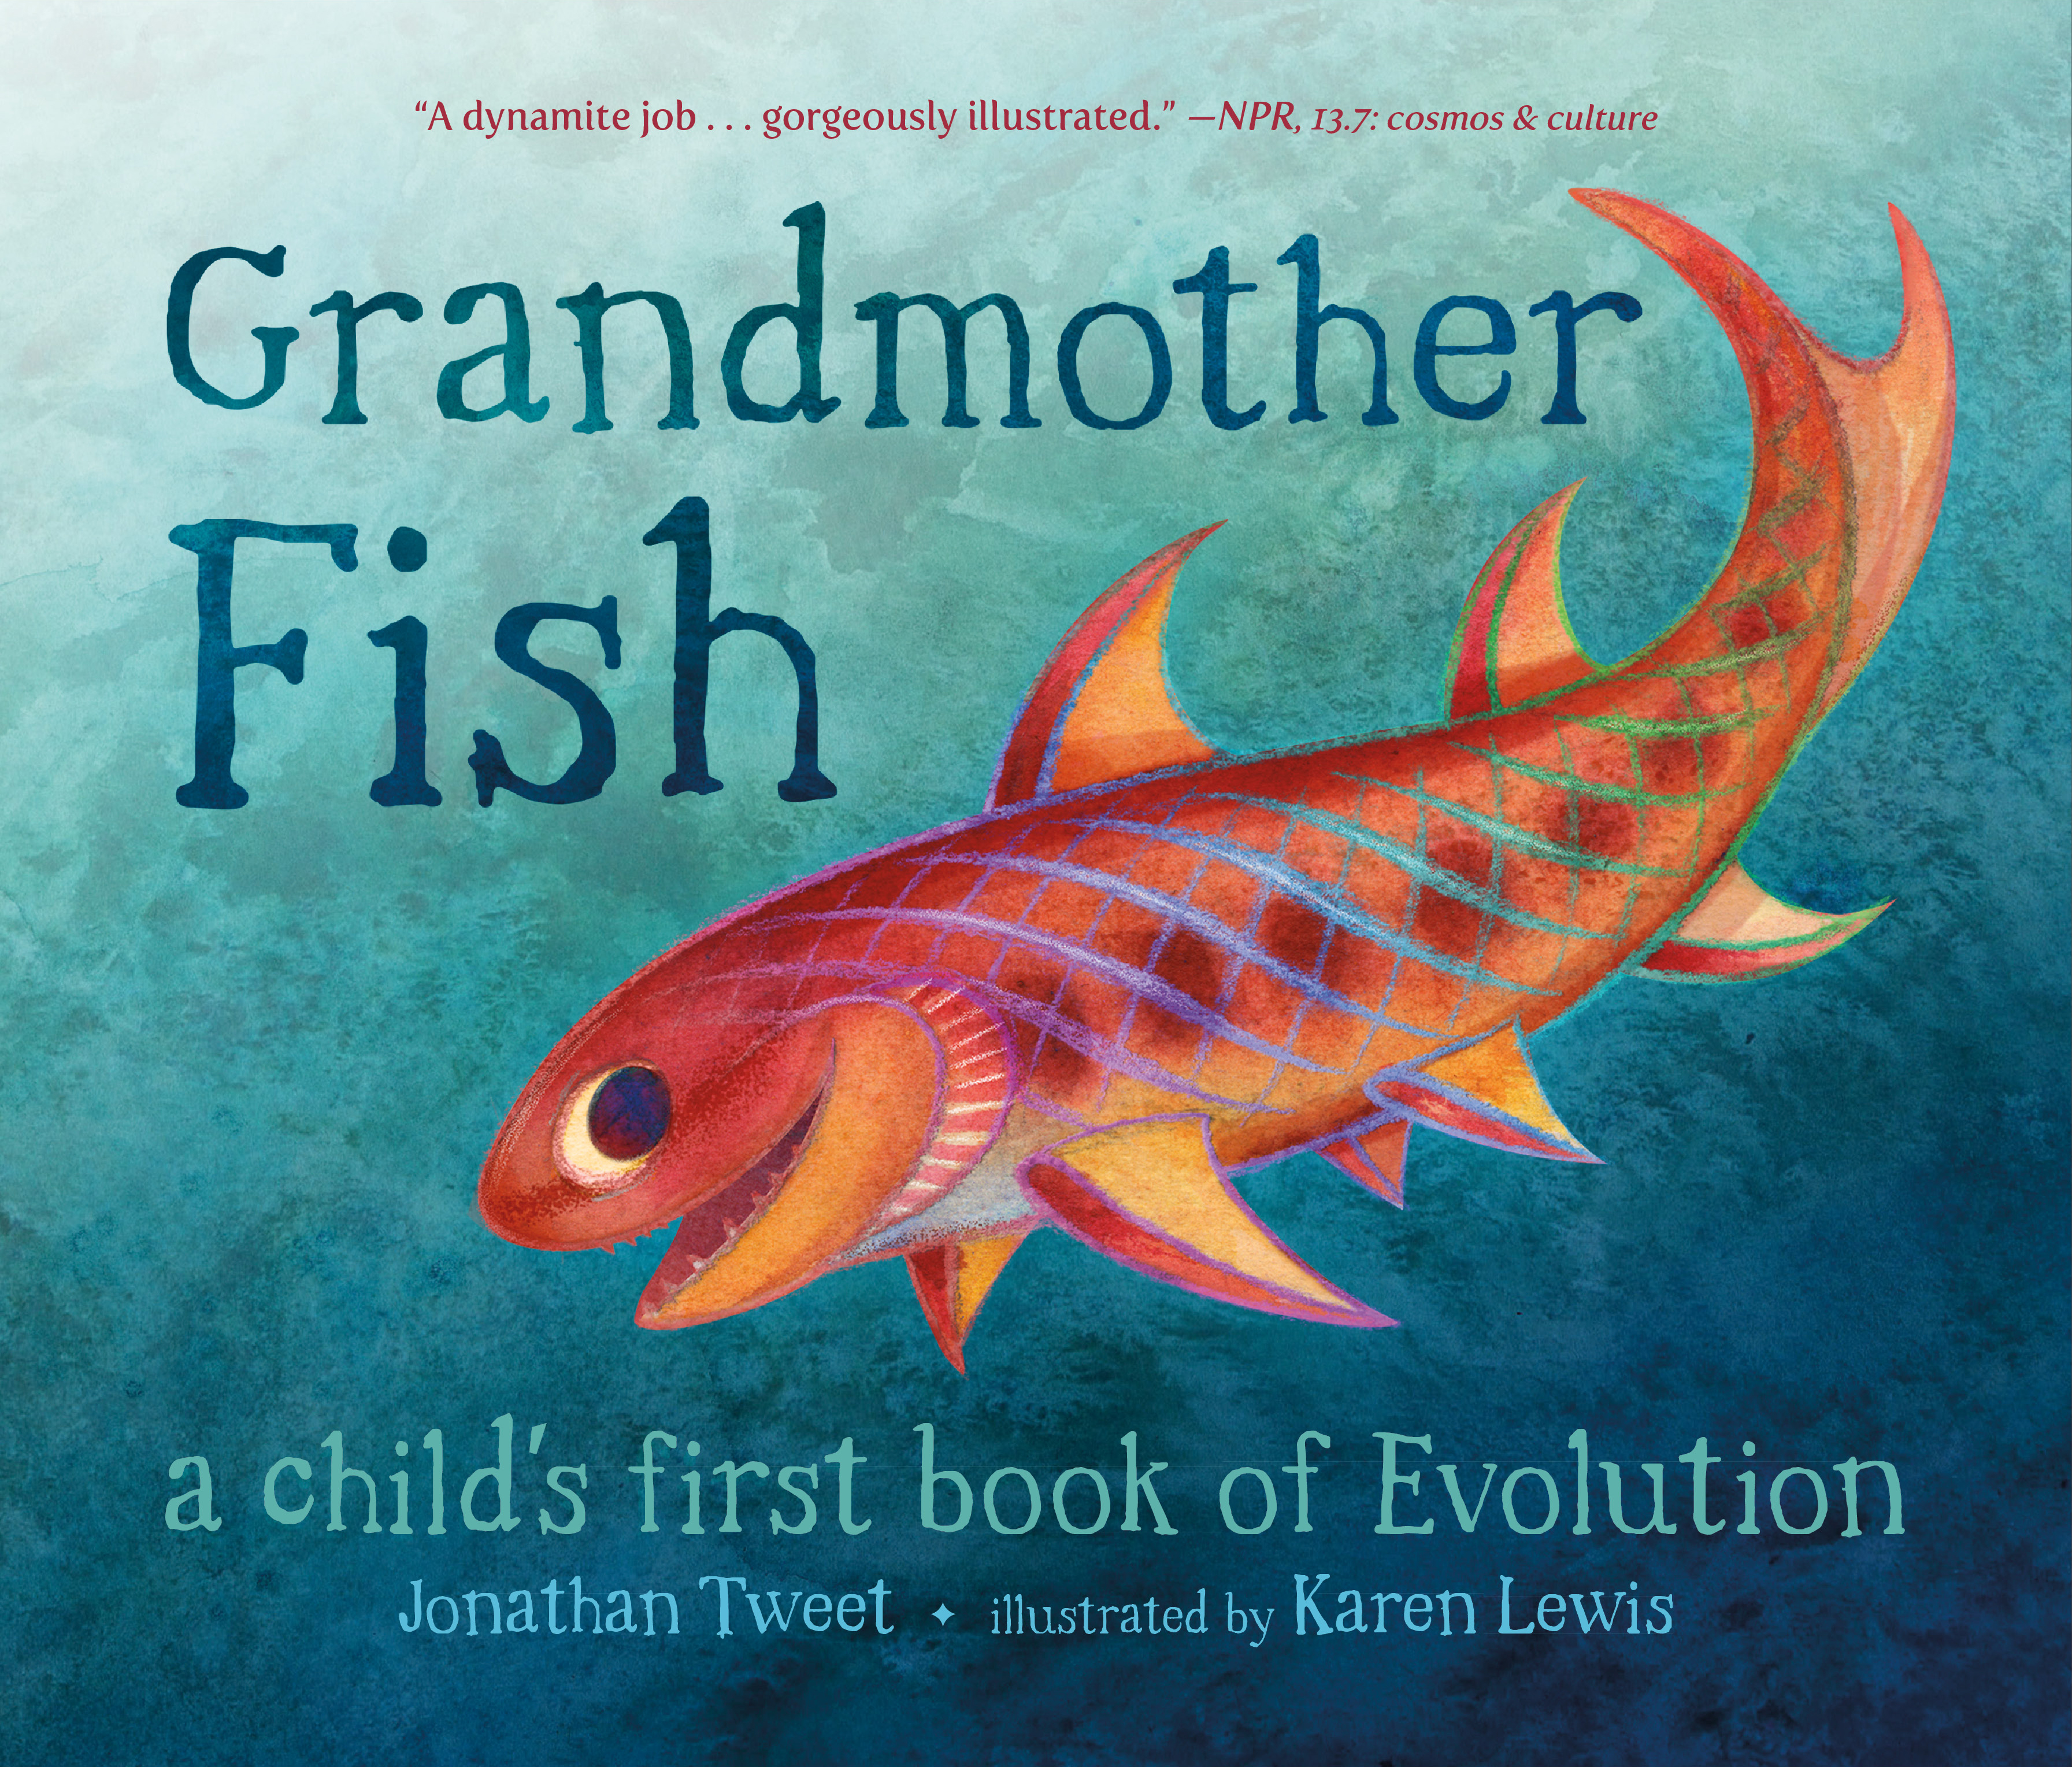 Evolution for Preschoolers: An Interview with "Grandmother Fish" Author Jonathan Tweet